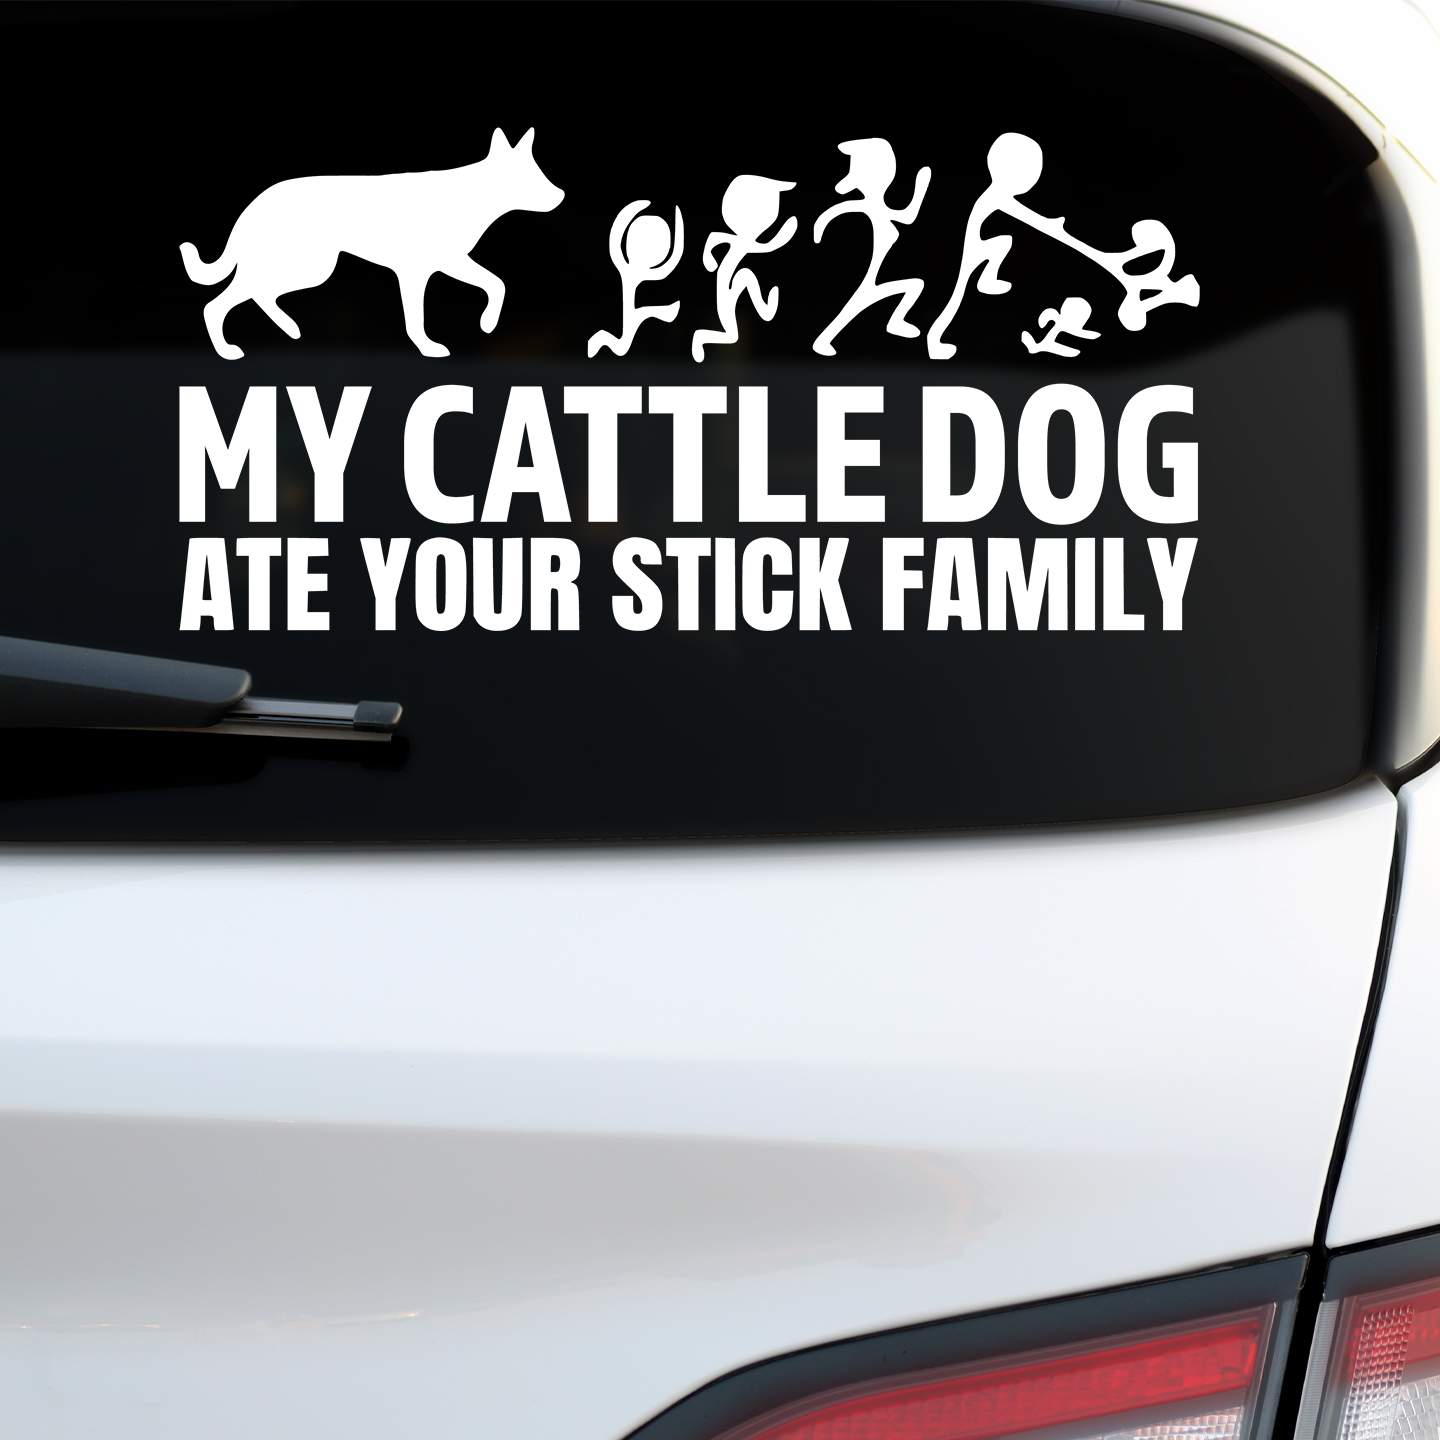 My Cattle Dog Ate Your Stick Family Sticker